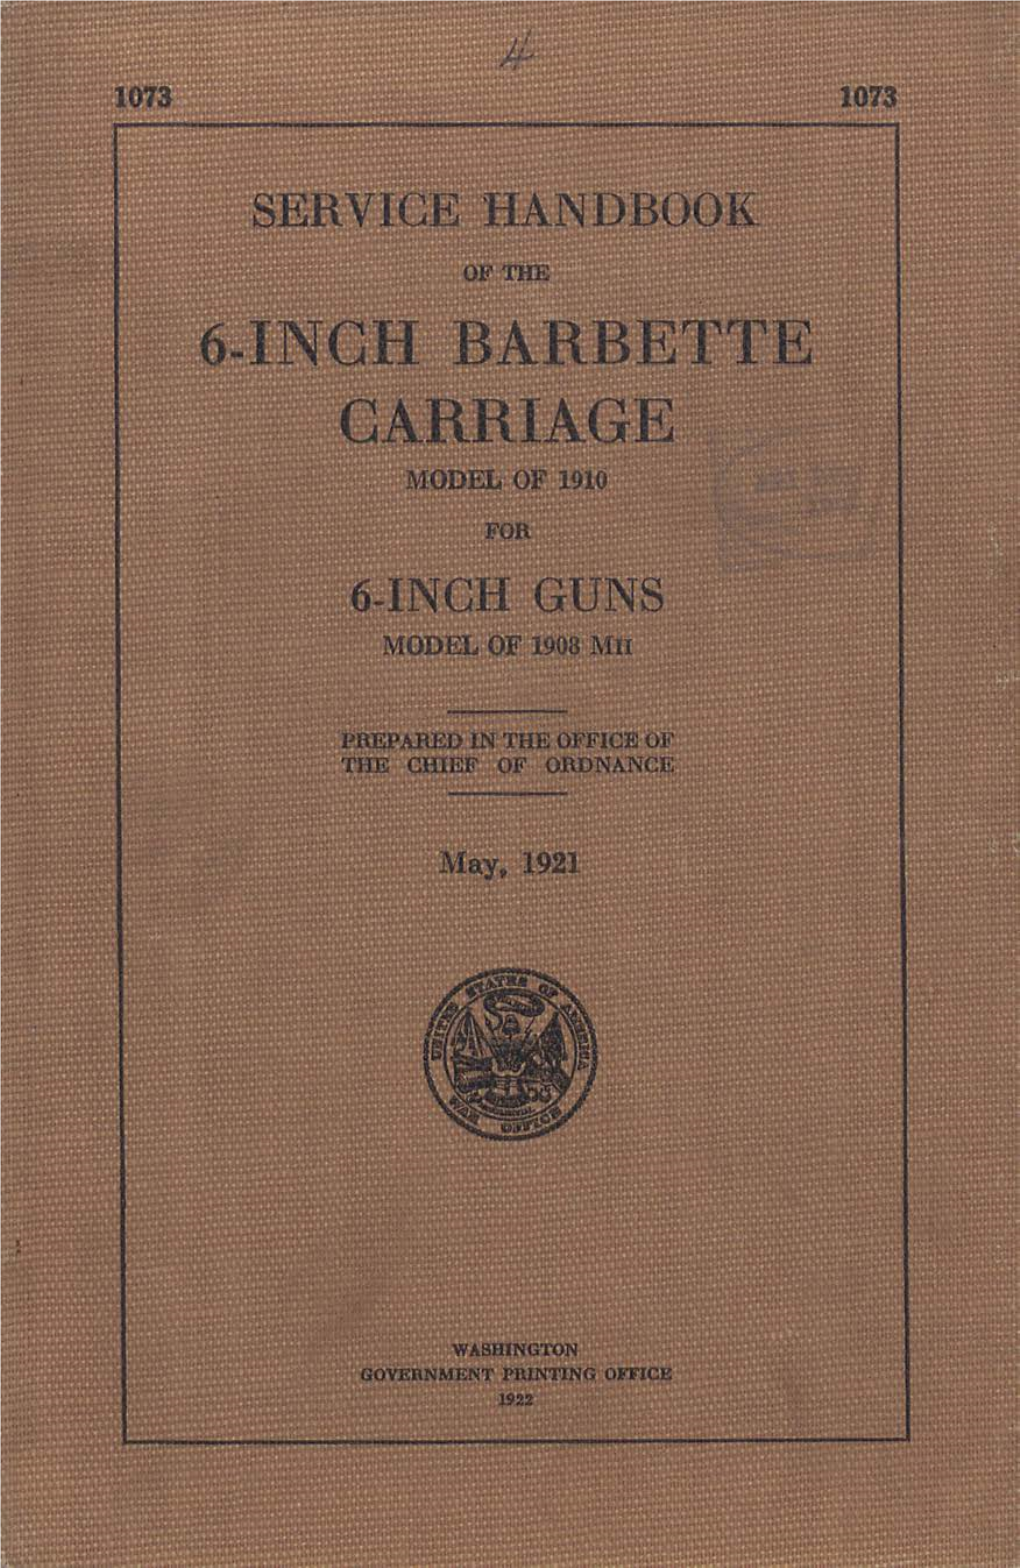 6-Ingh Barbette . Carriage Model of 1910